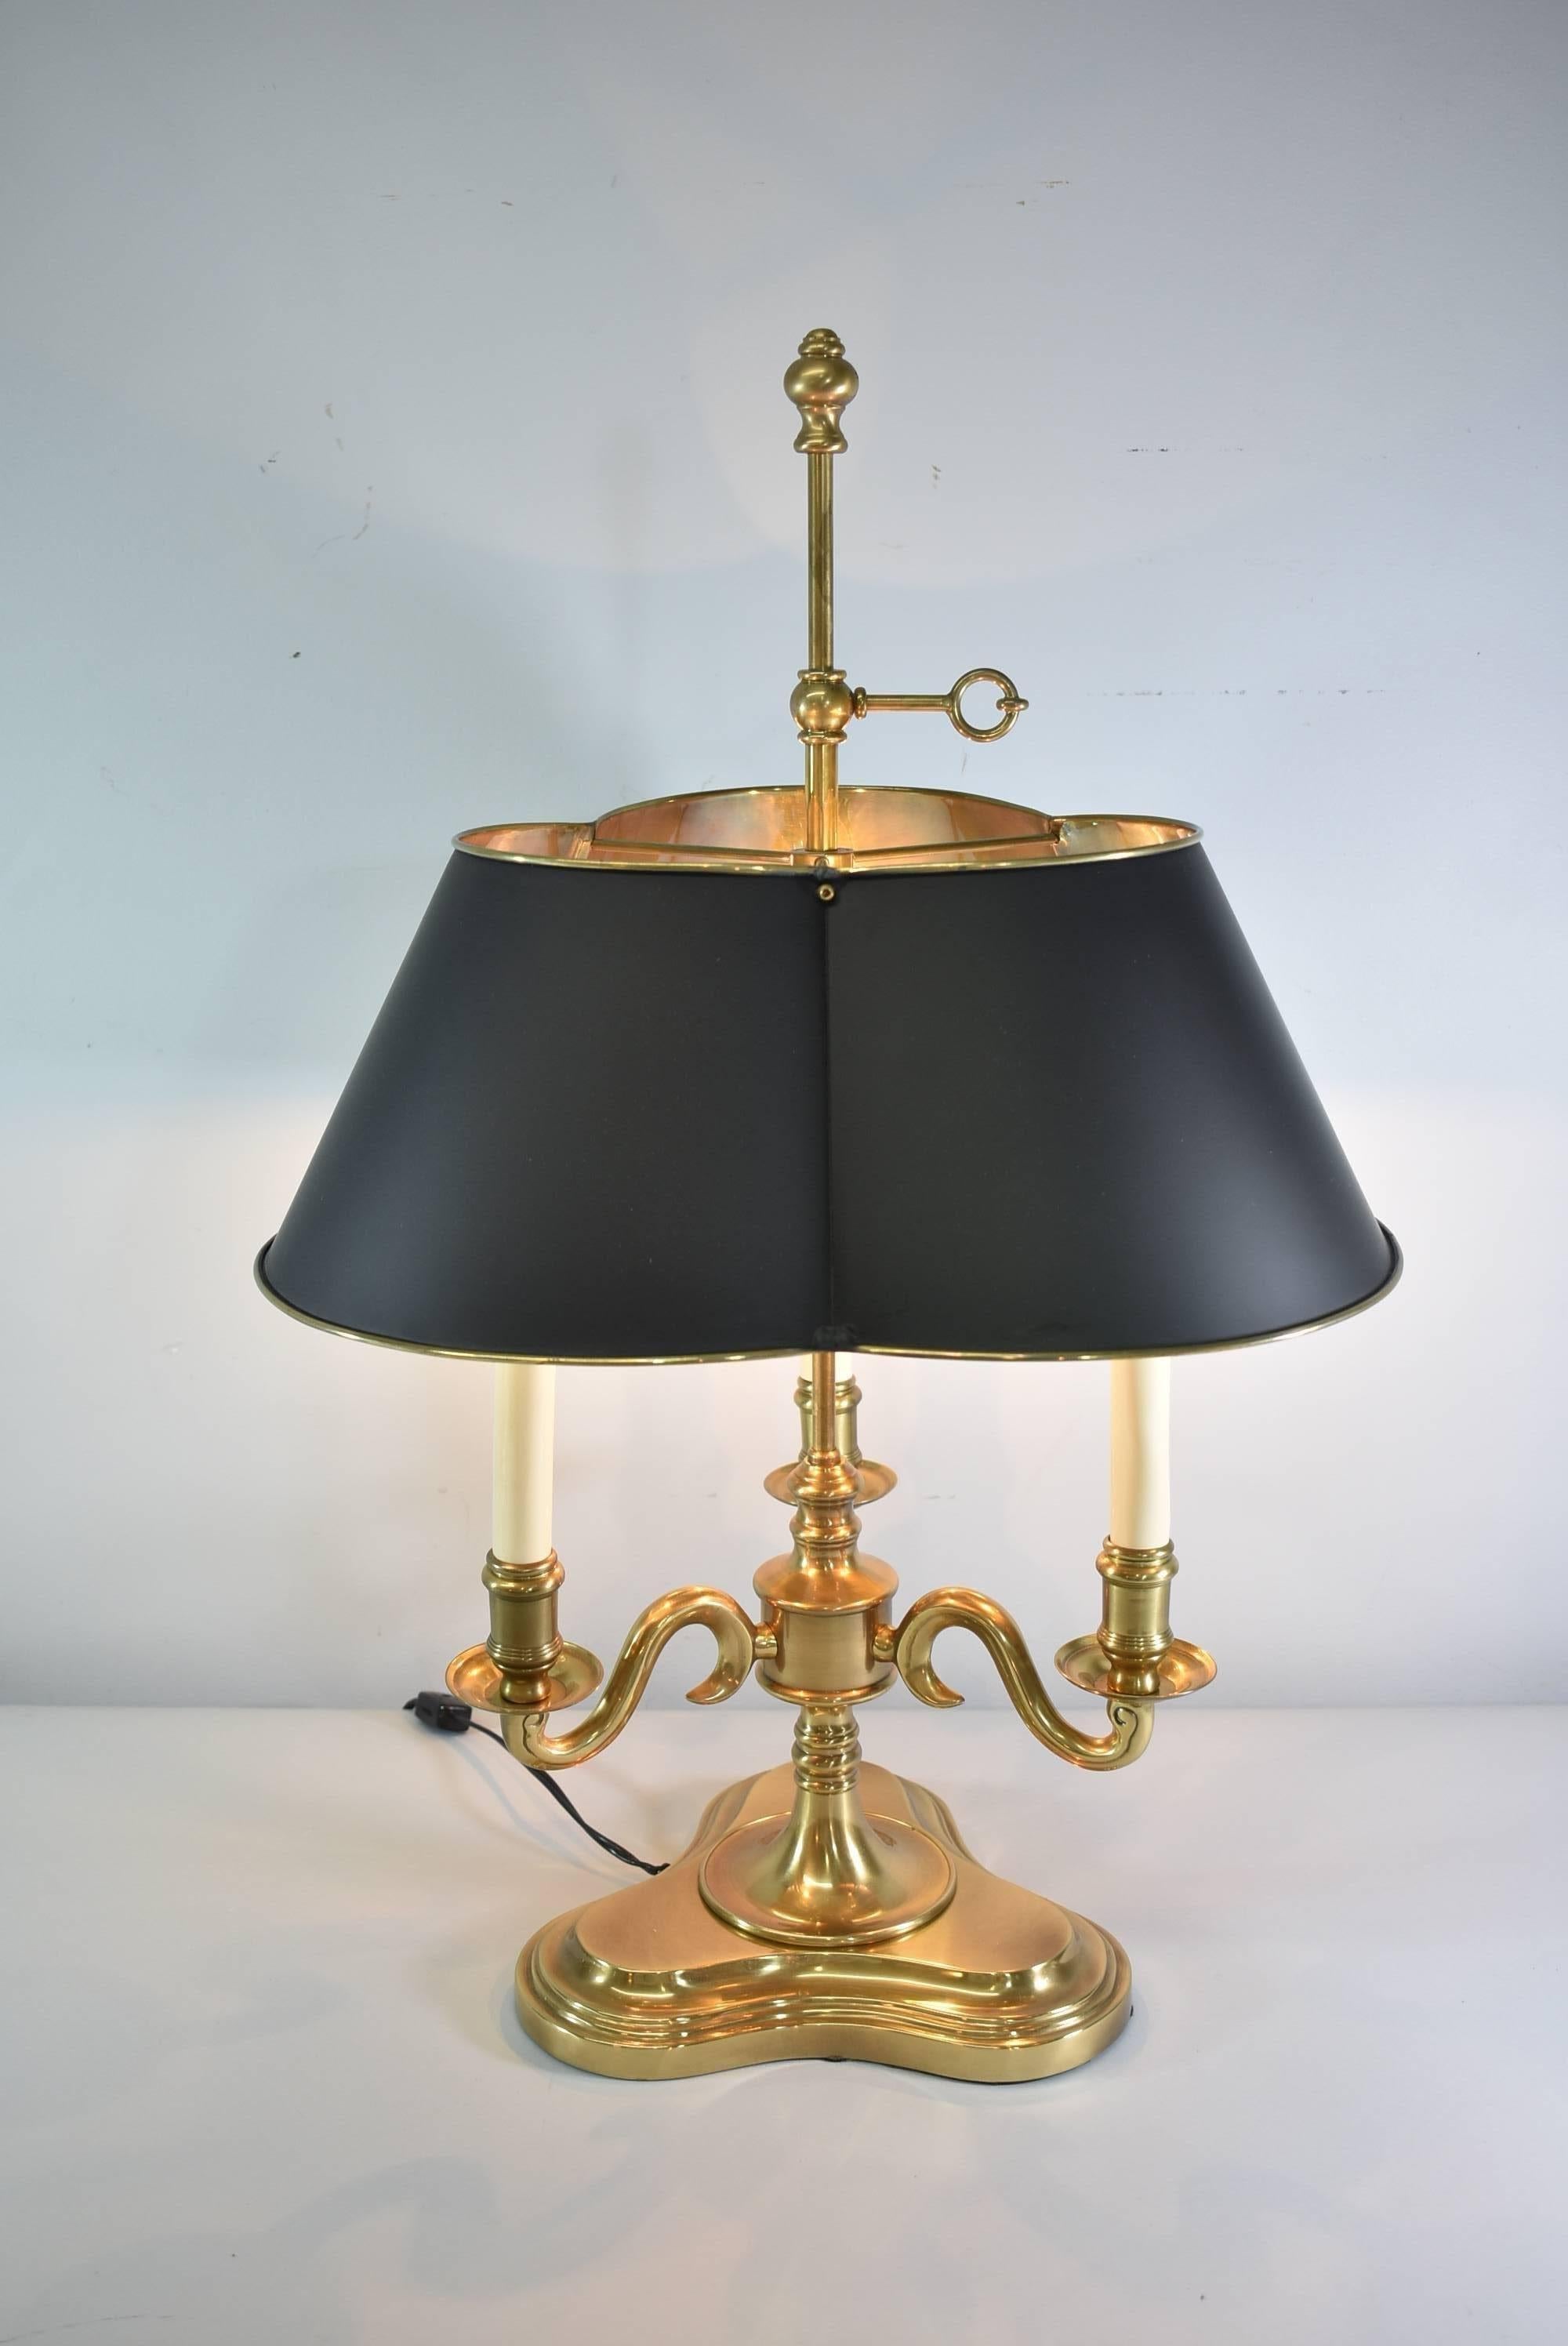 A beautiful brass Bouillotte lamp by Frederick Cooper. French Empire style with a painted black Tole shade and three candelabra style arms. Marked on the bottom with Frederick Cooper label. The lamp would look great in an office, den or large room.